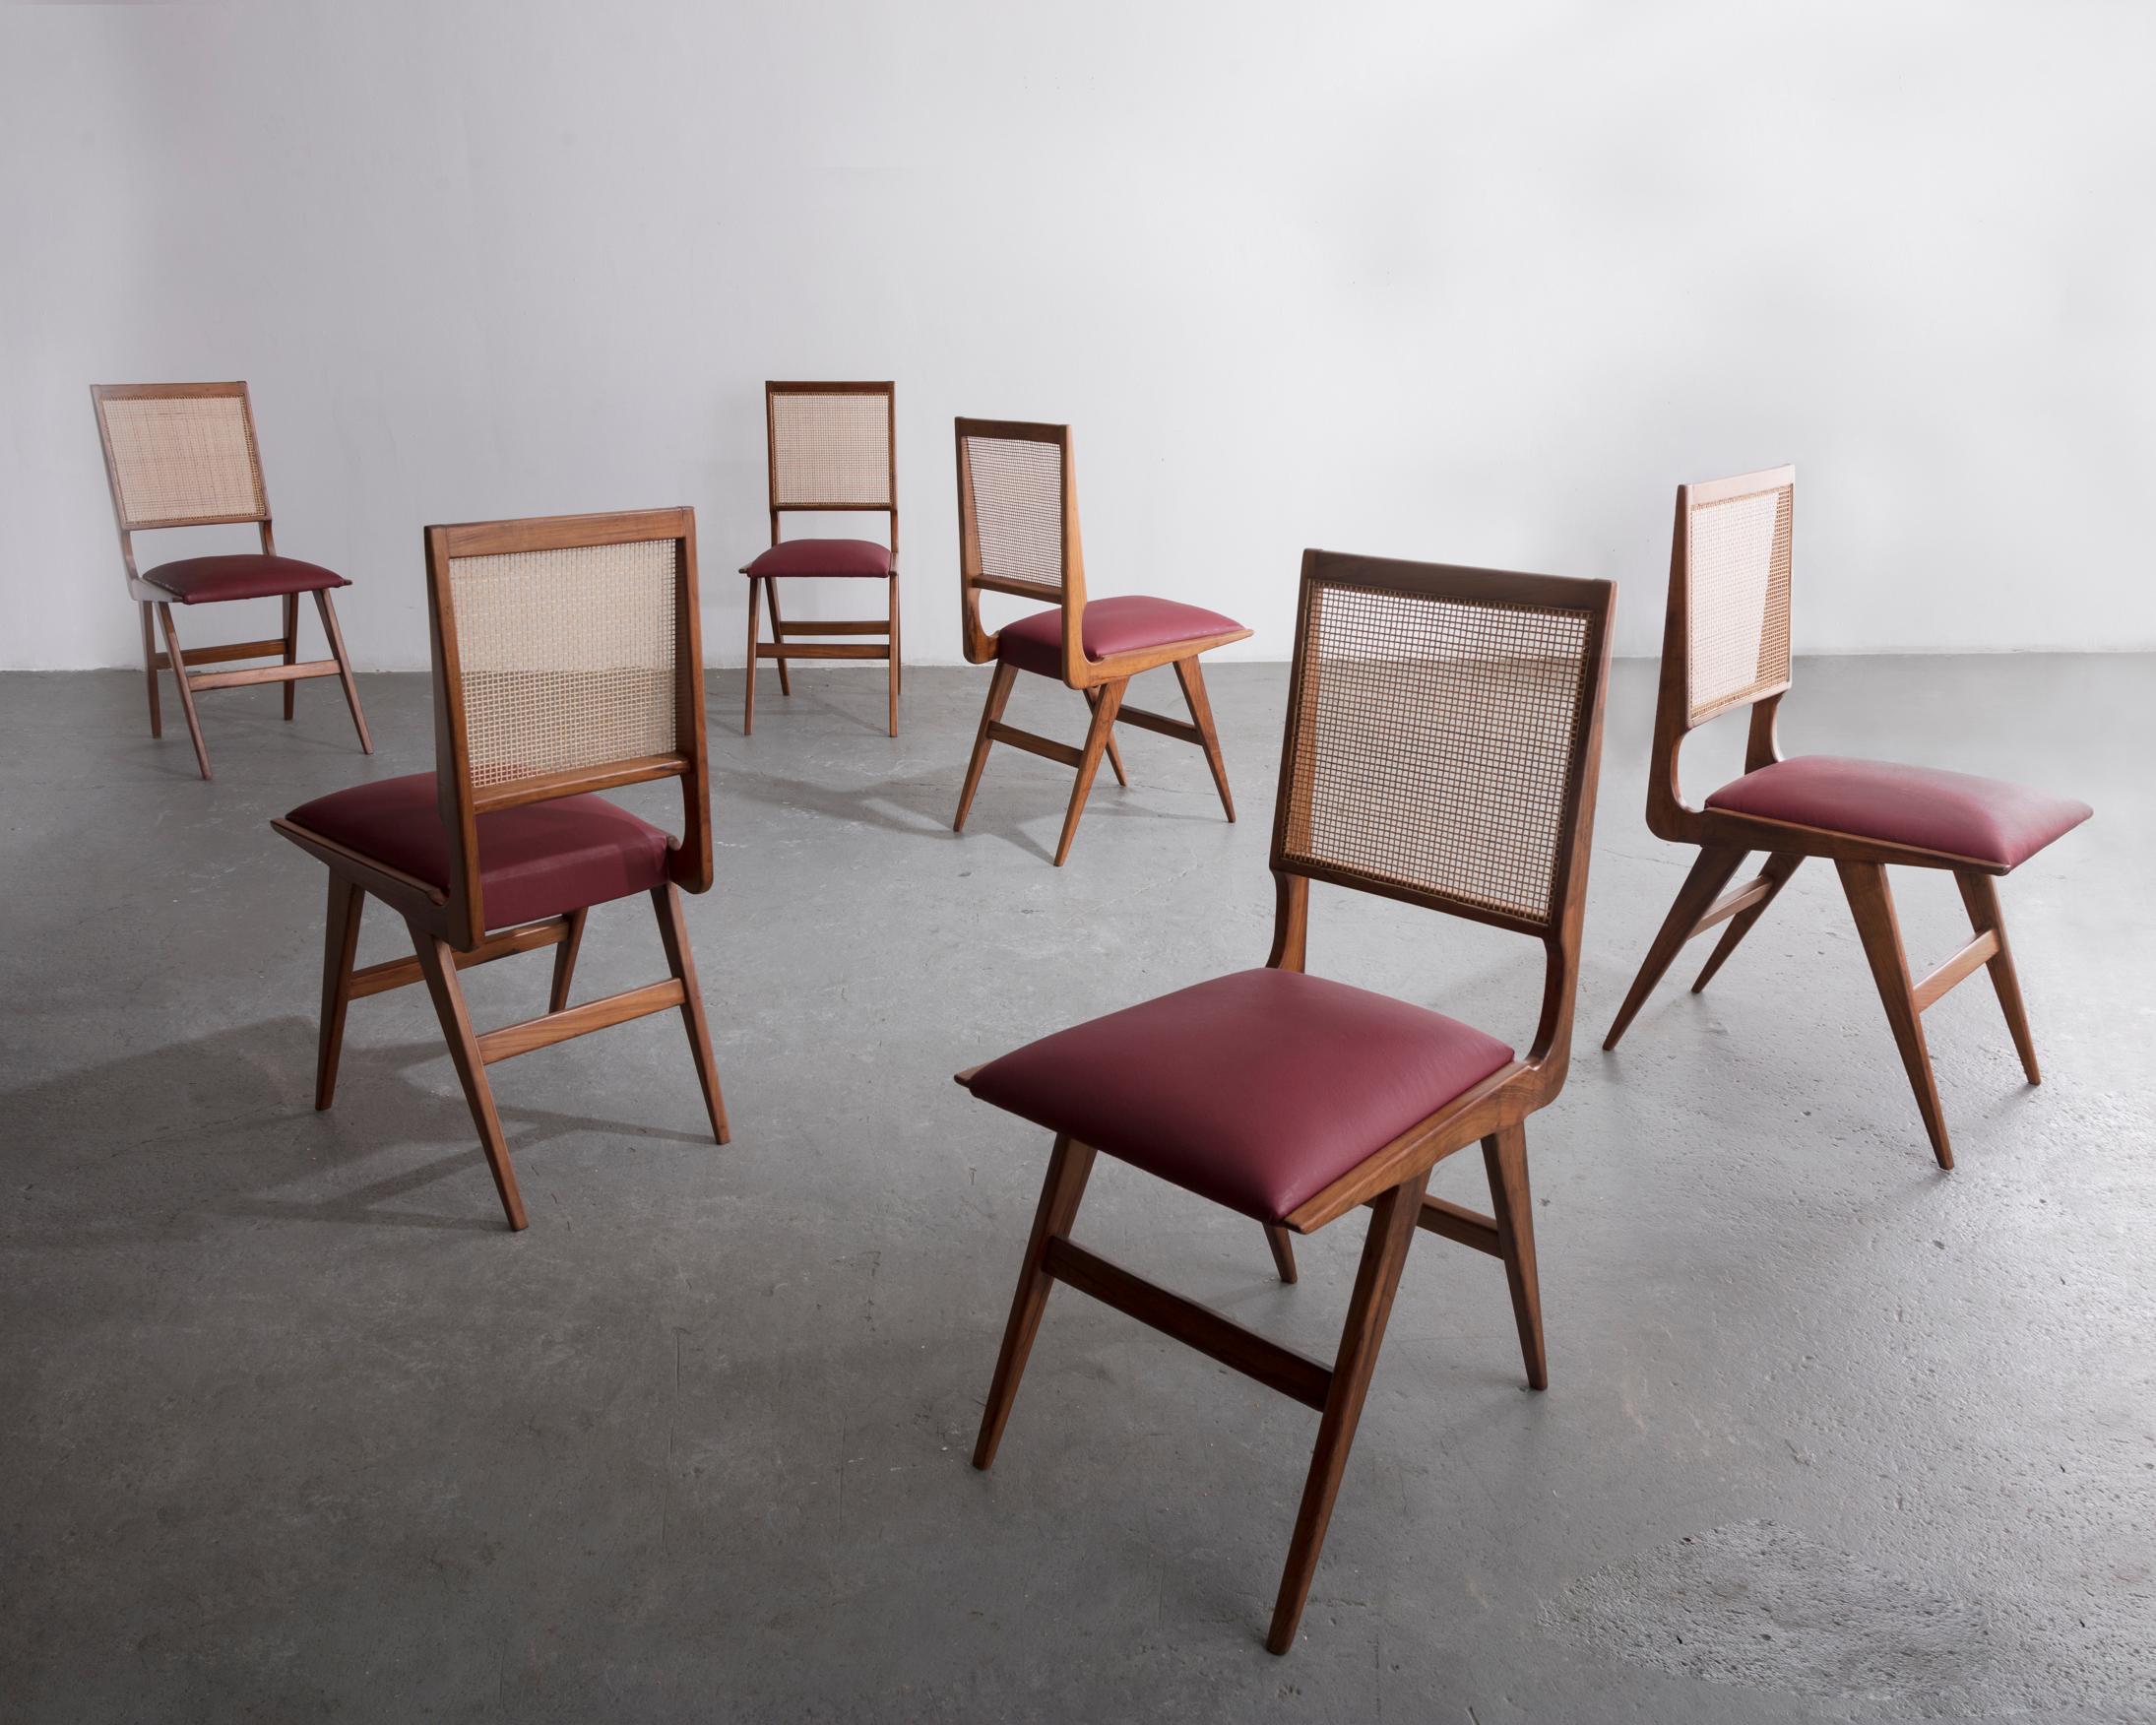 Set of six (6) dining chairs in peroba with upholstered seats and cane backrests. Designed by Martin Eisler for Forma, Brazil, 1950s.